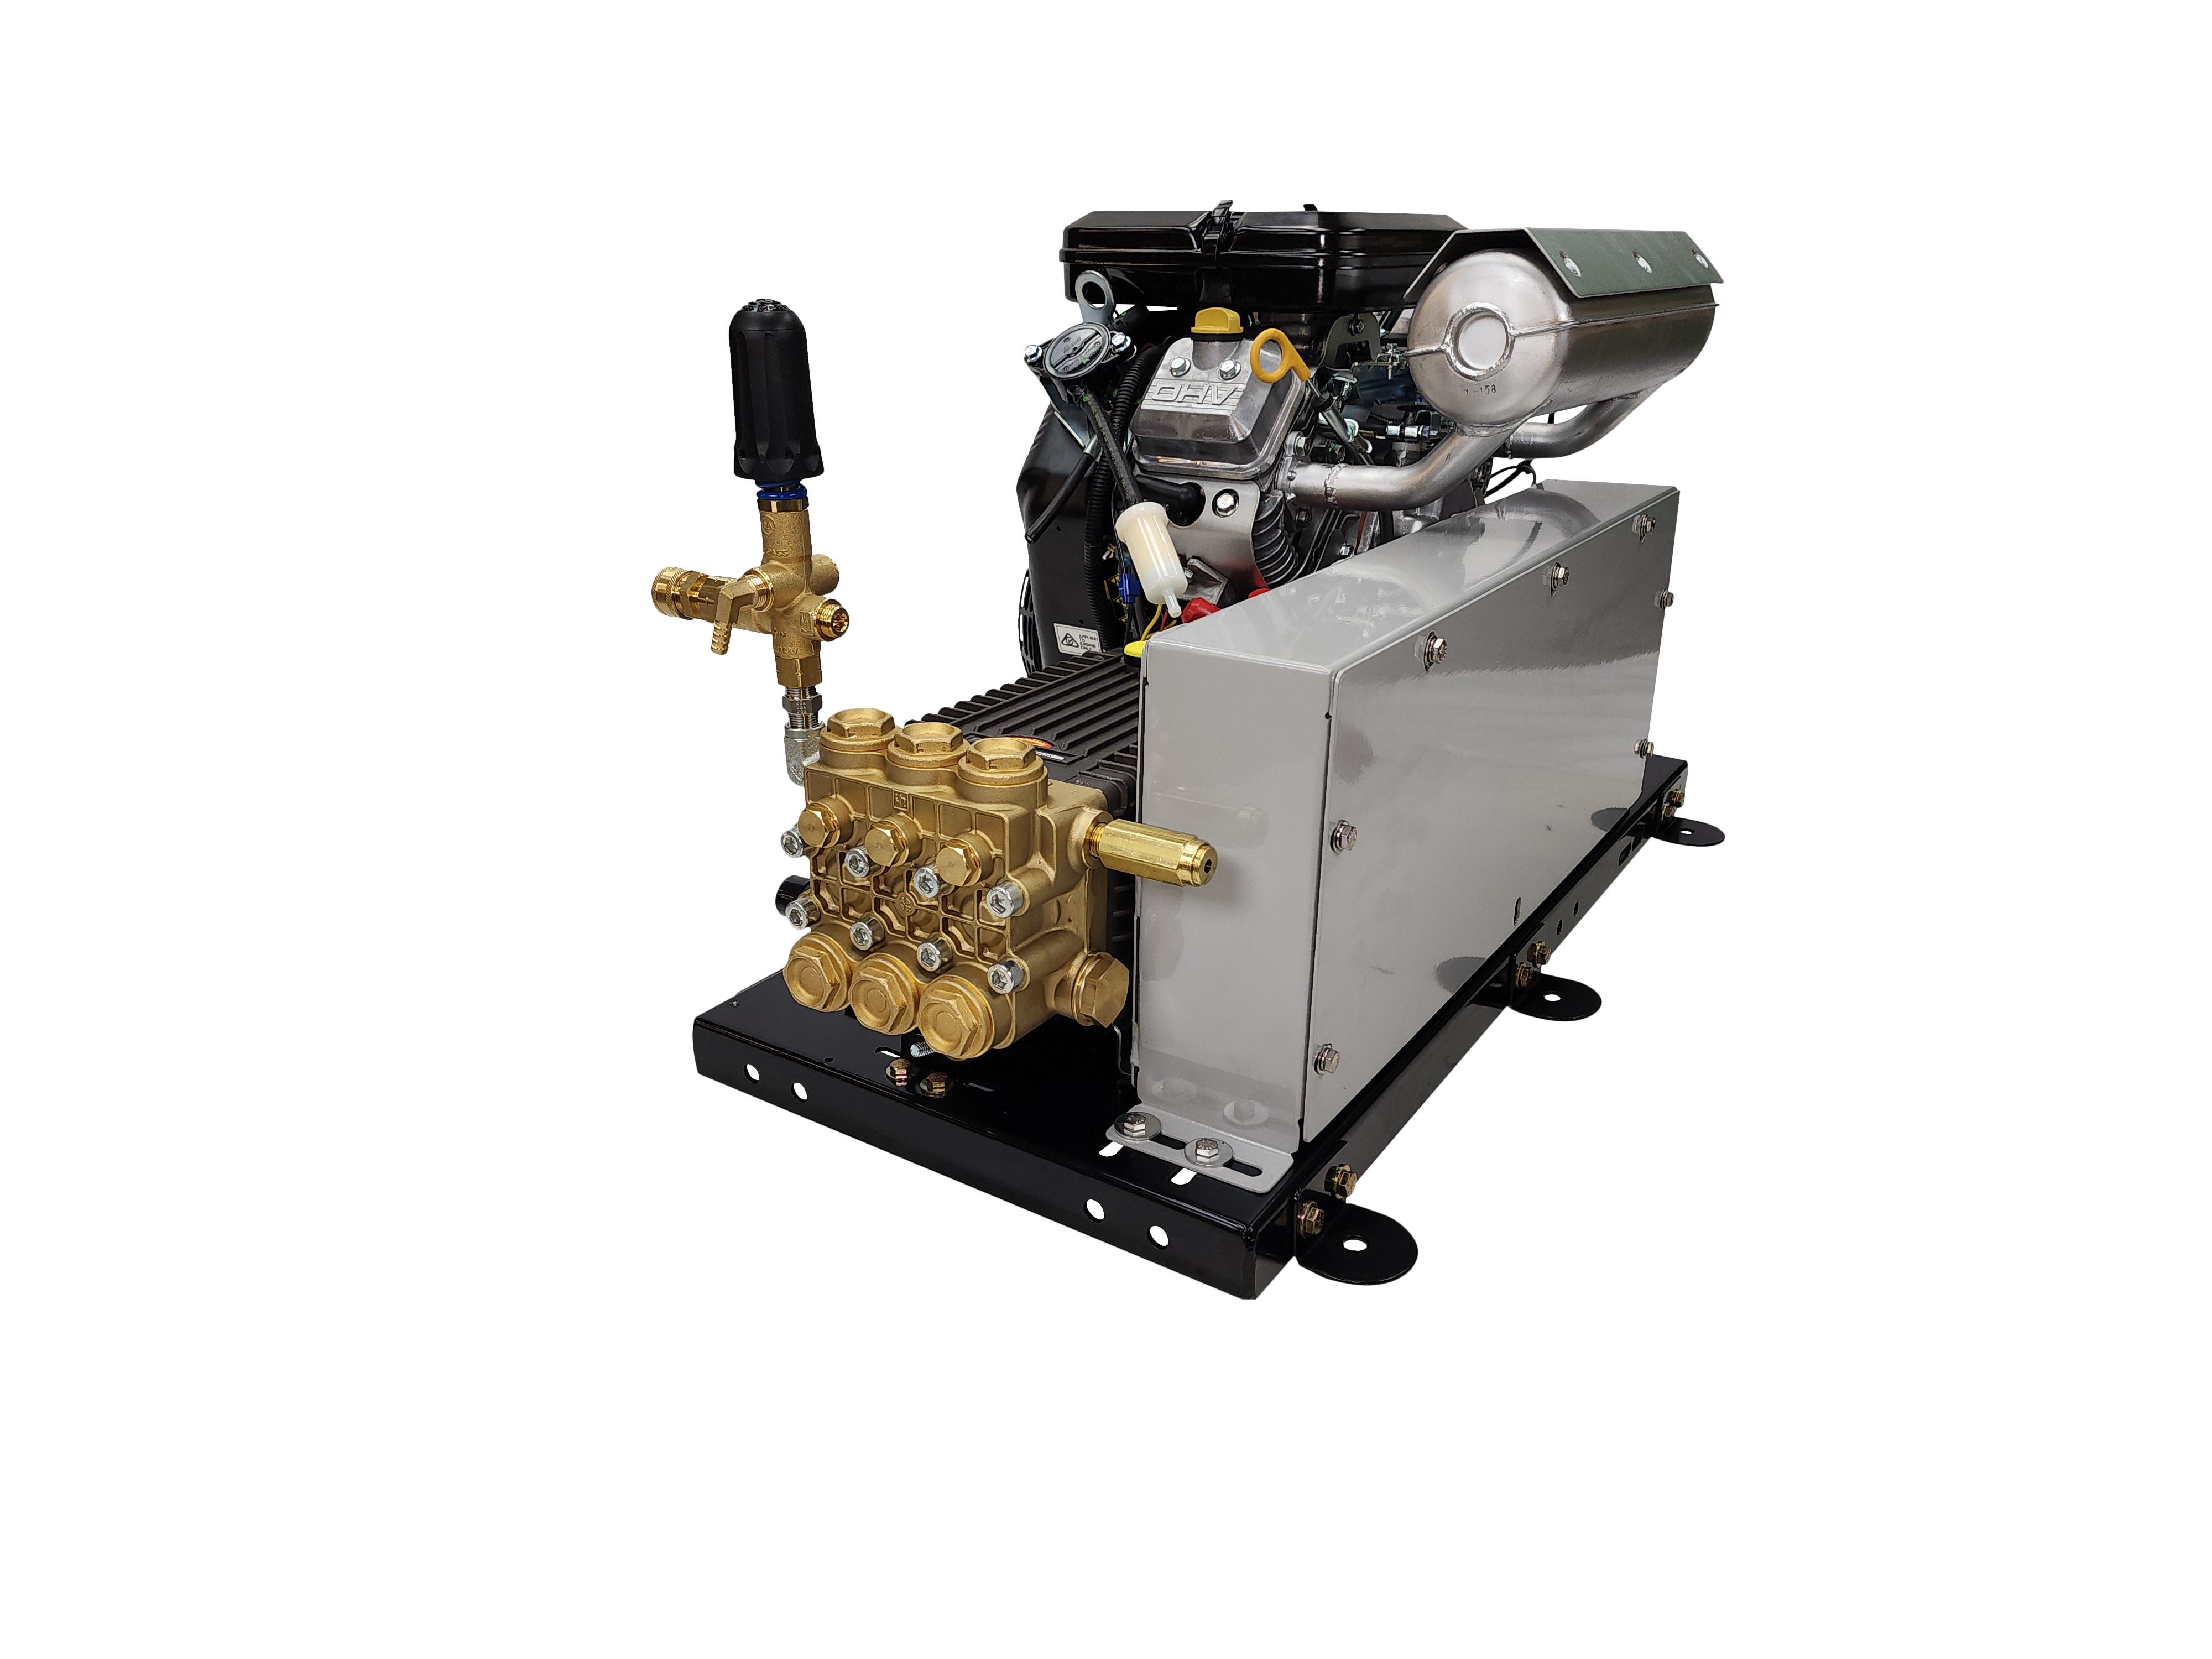 Hydro Max CWP-B 8036VG - 8gpm@3600psi Business & Industrial Hydro Max 